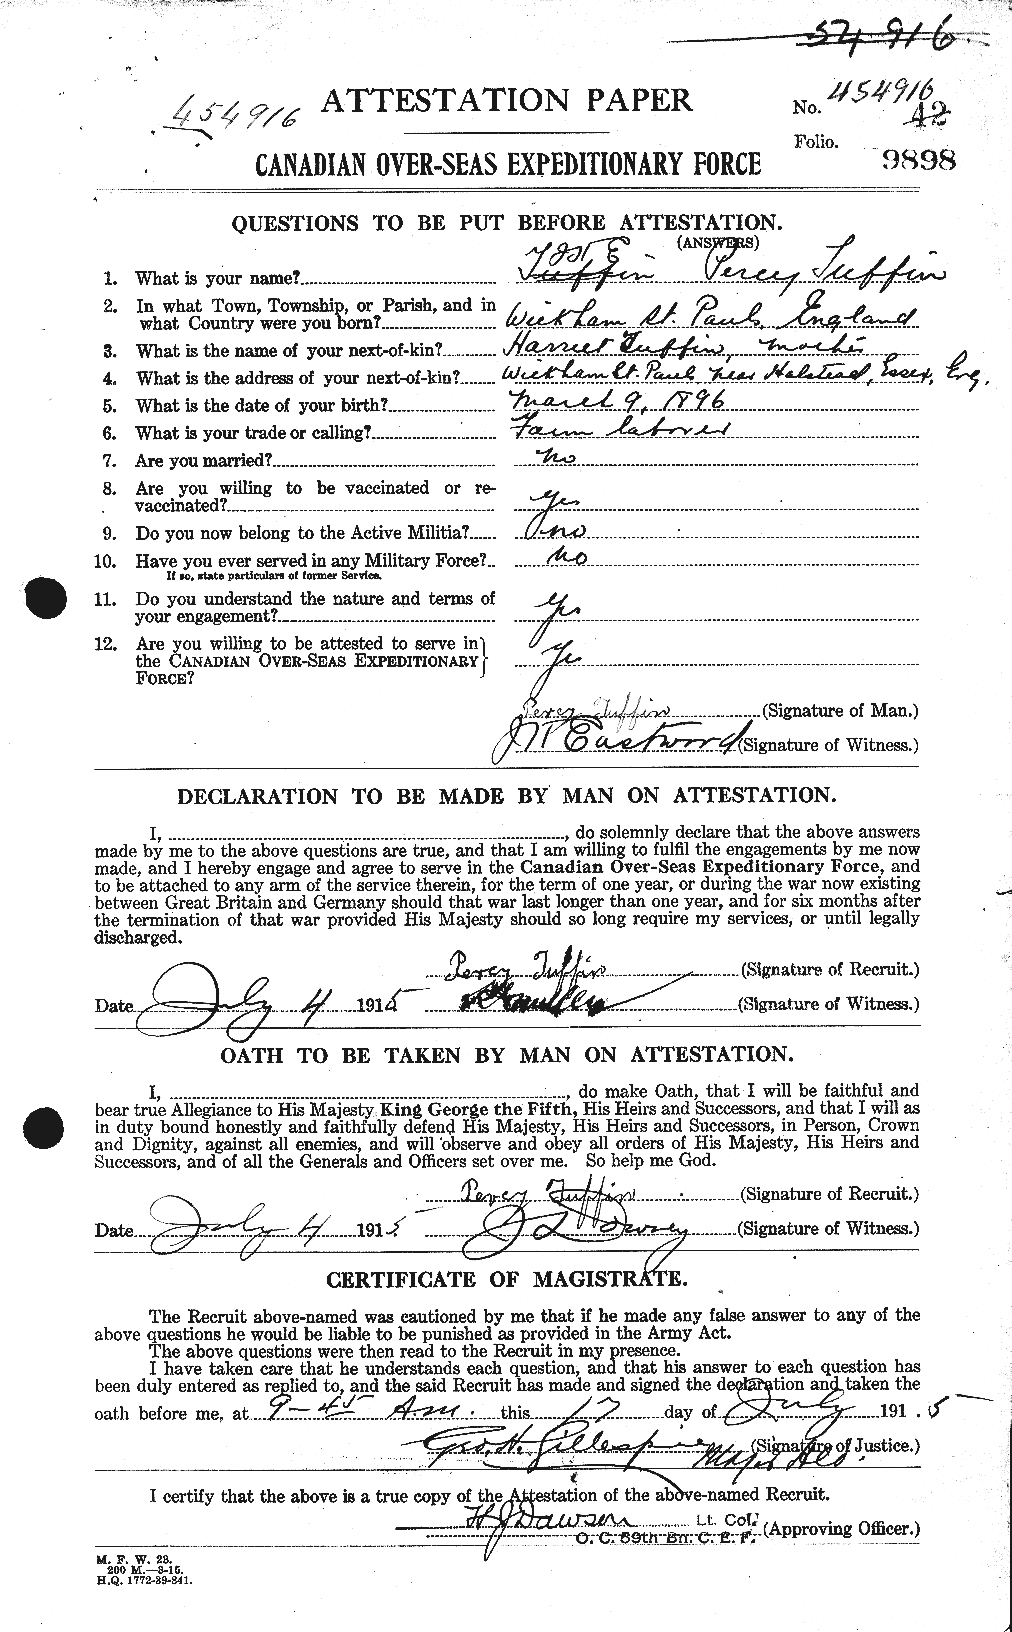 Personnel Records of the First World War - CEF 642996a